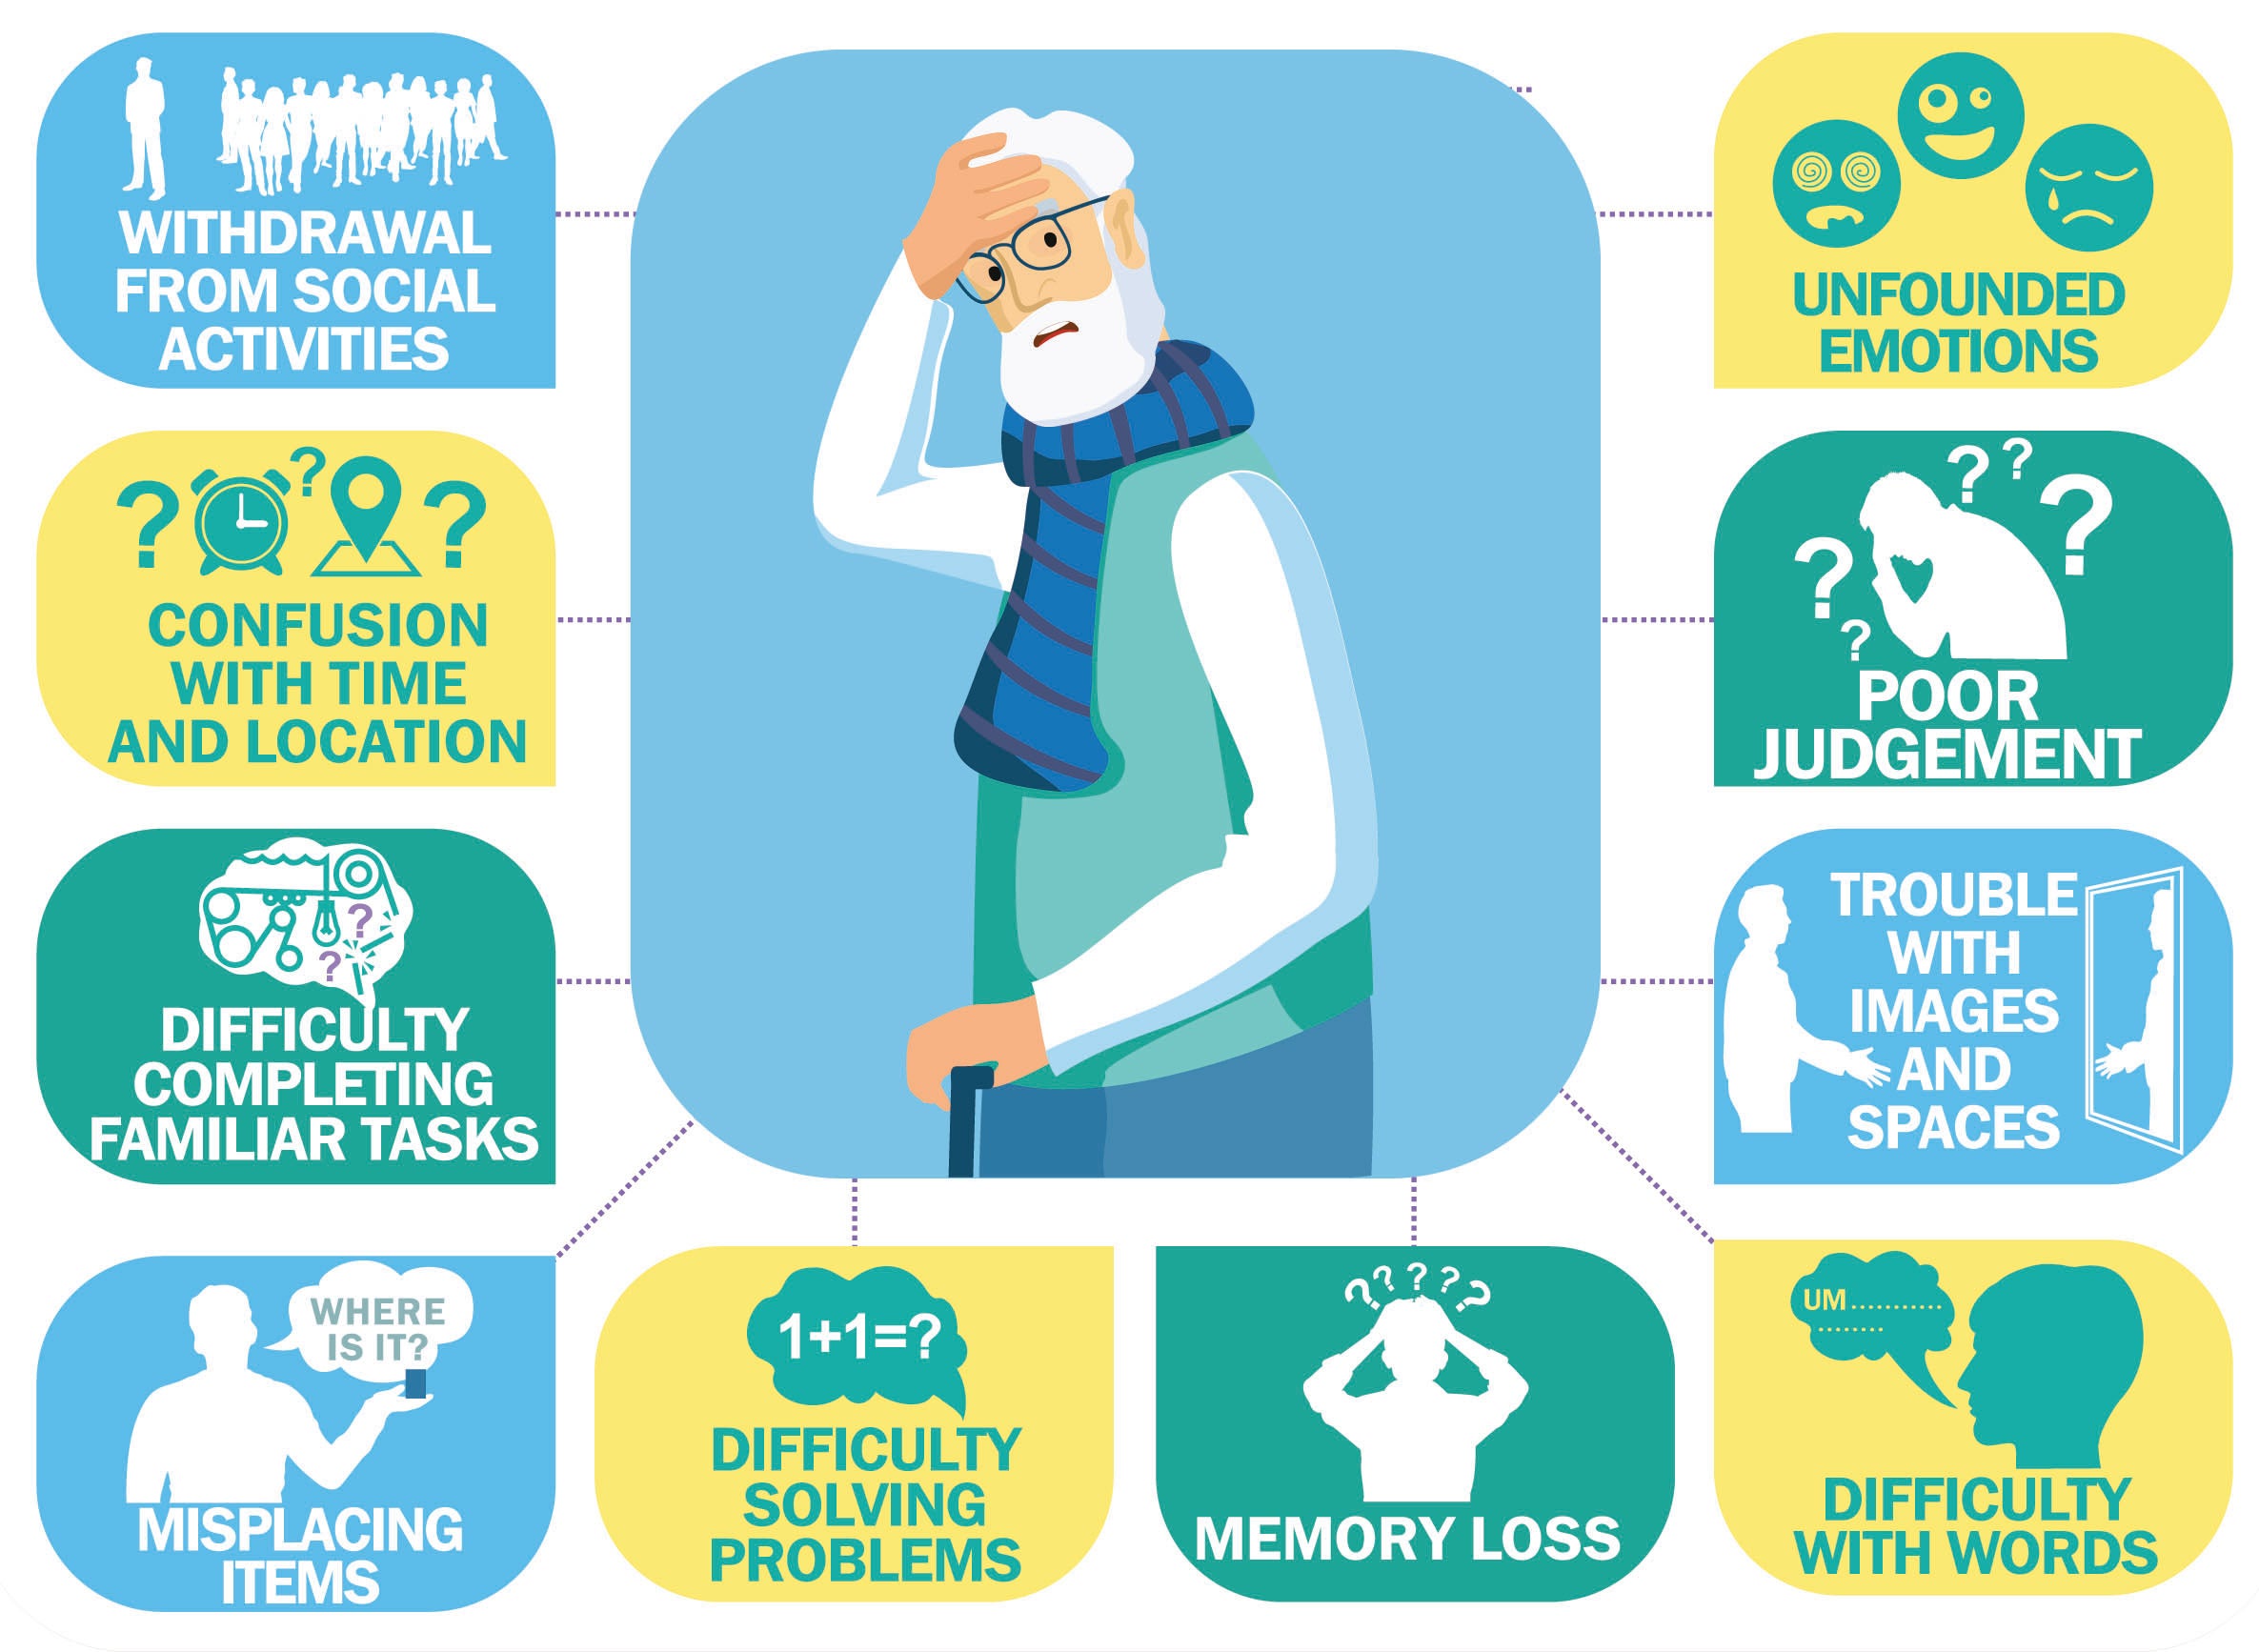 Alzheimer's can be identified by these symptoms